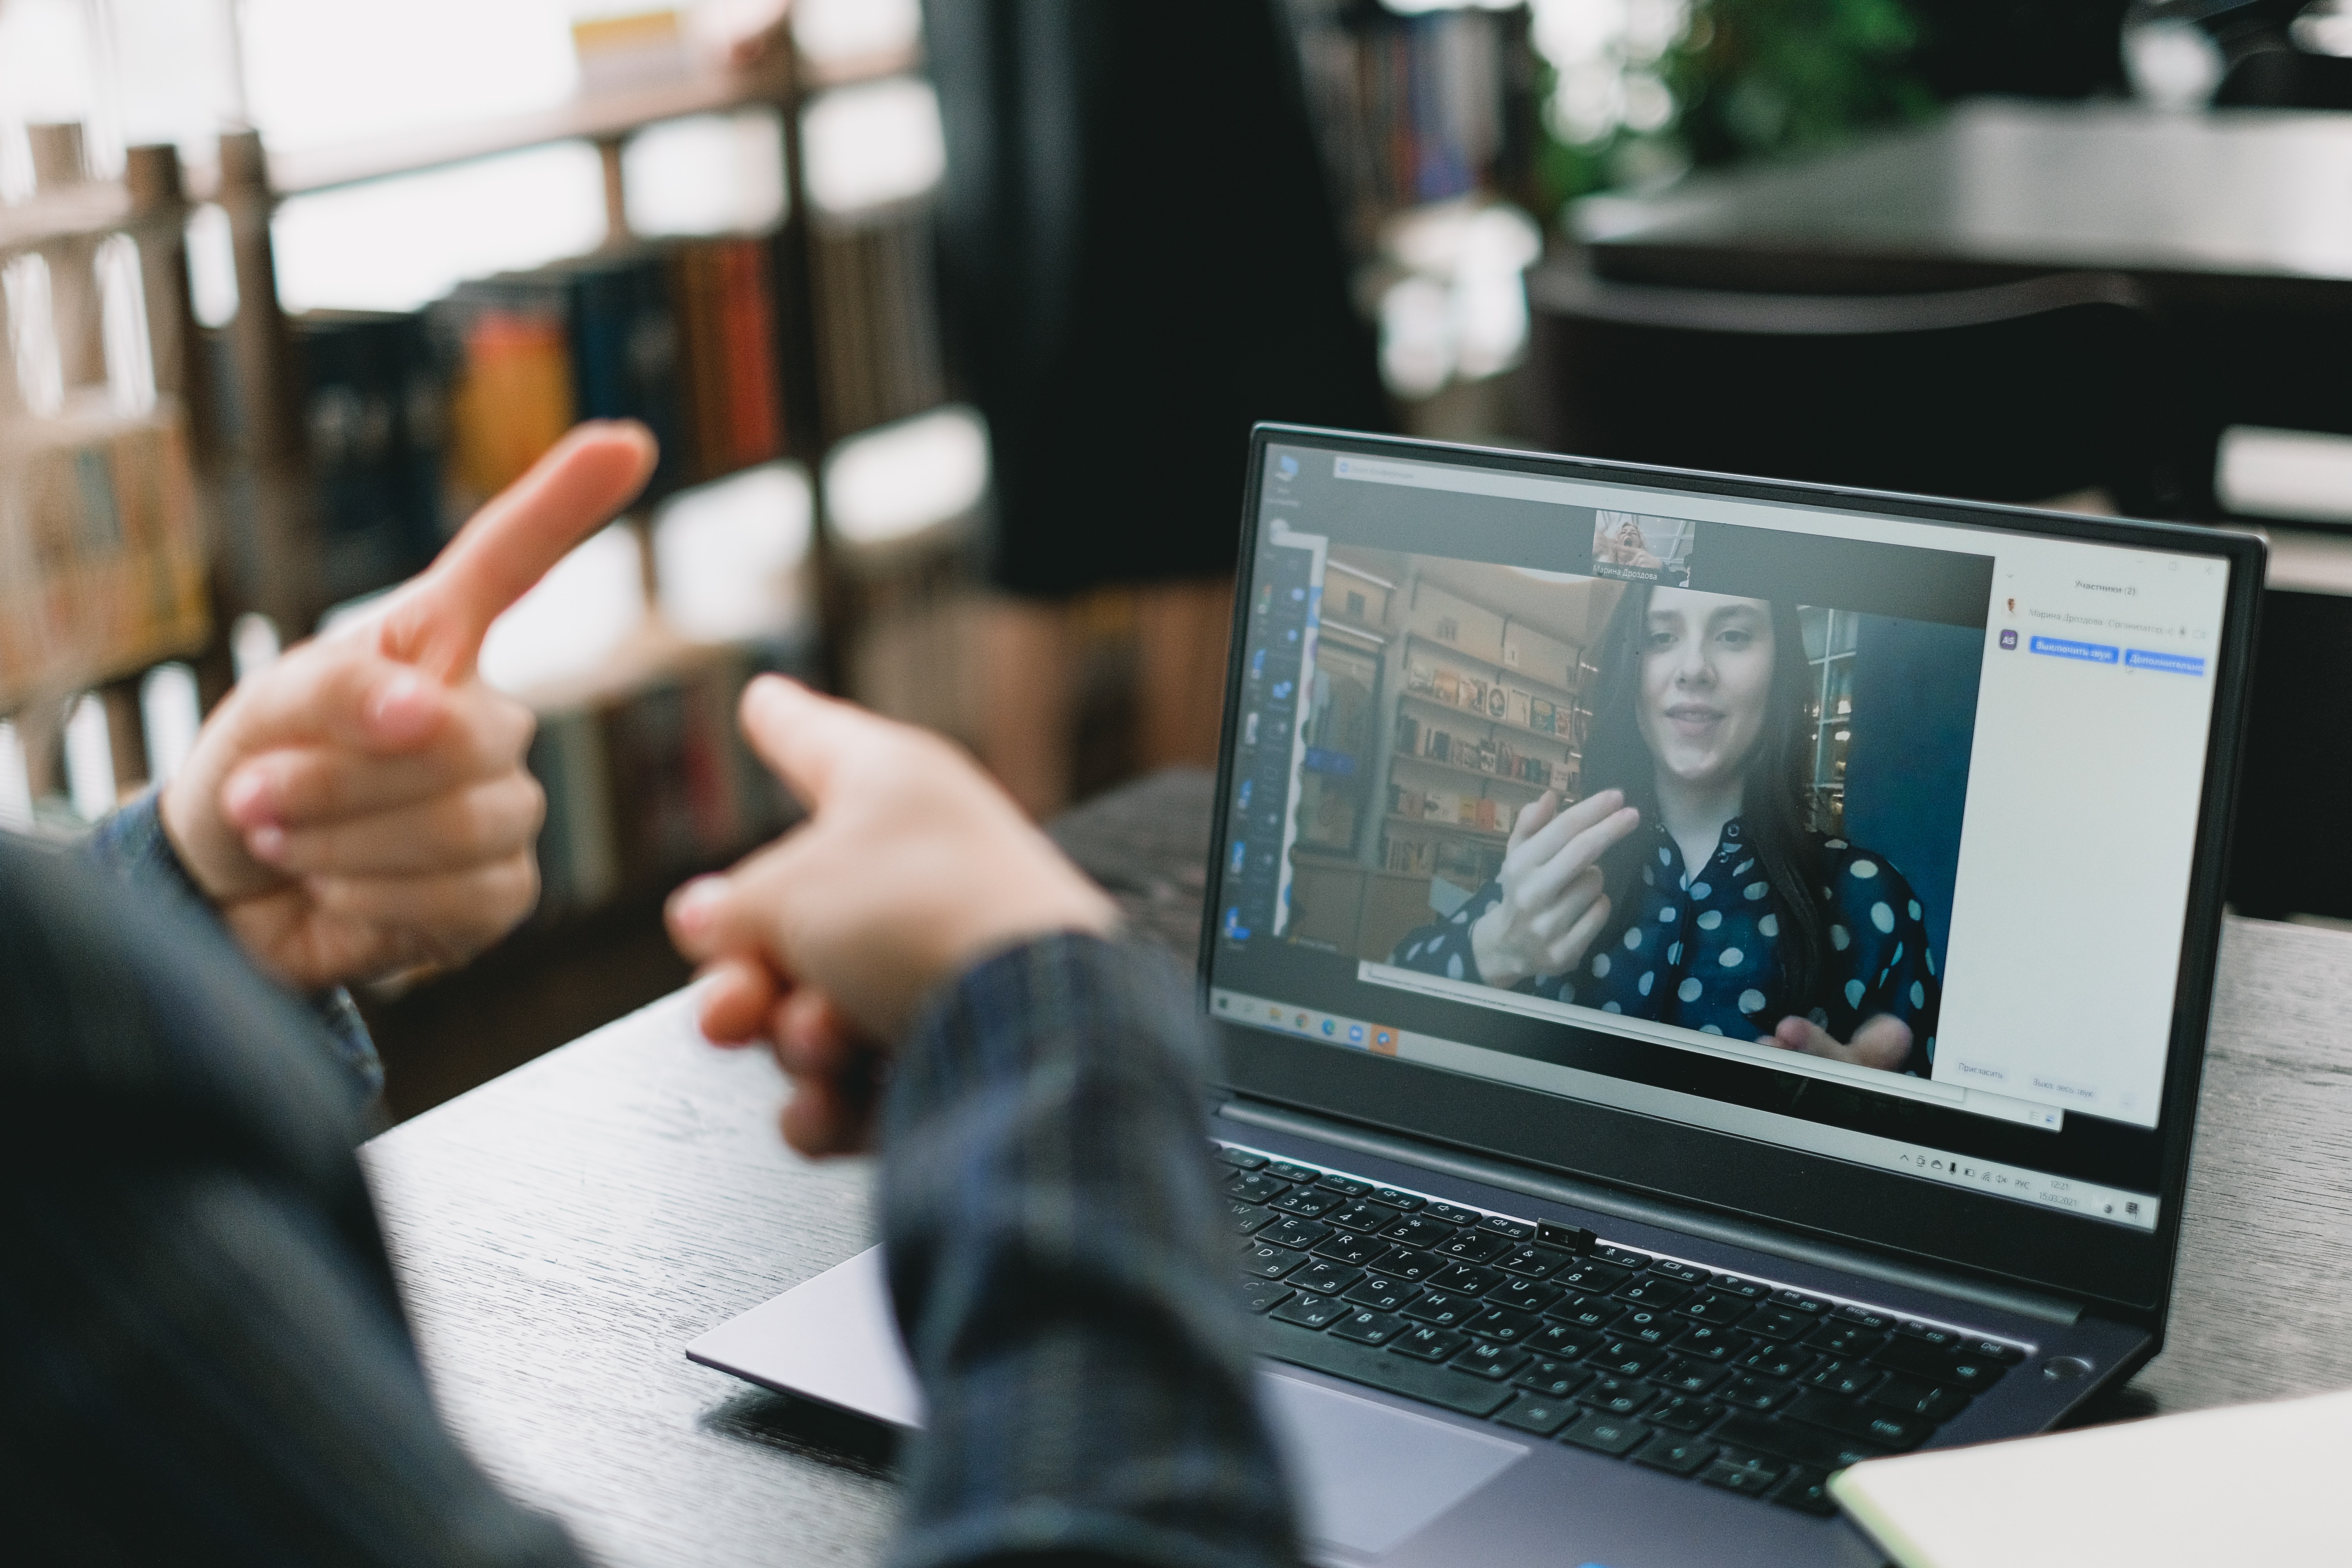 This is an image of two people having a virtual sign language conversation. On the laptop, a woman is talking back in sign language to a man.